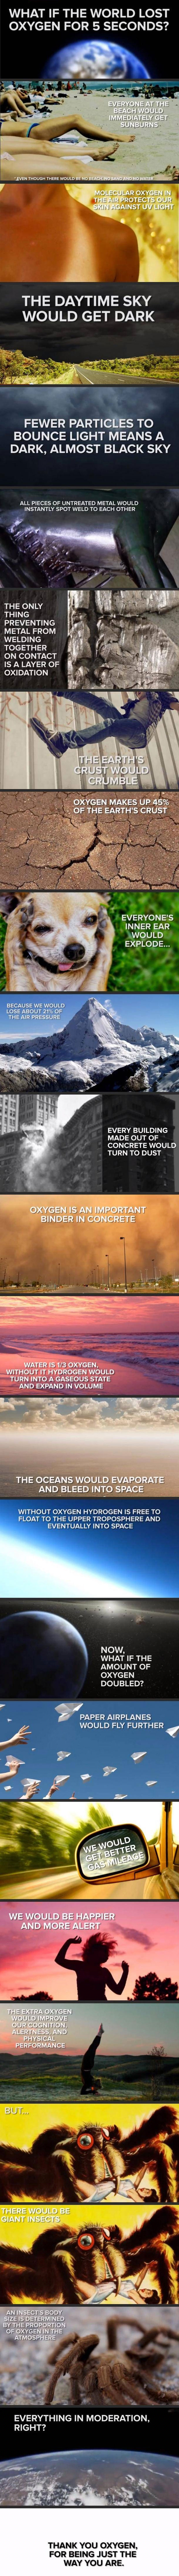 How important is Oxygen for our planet